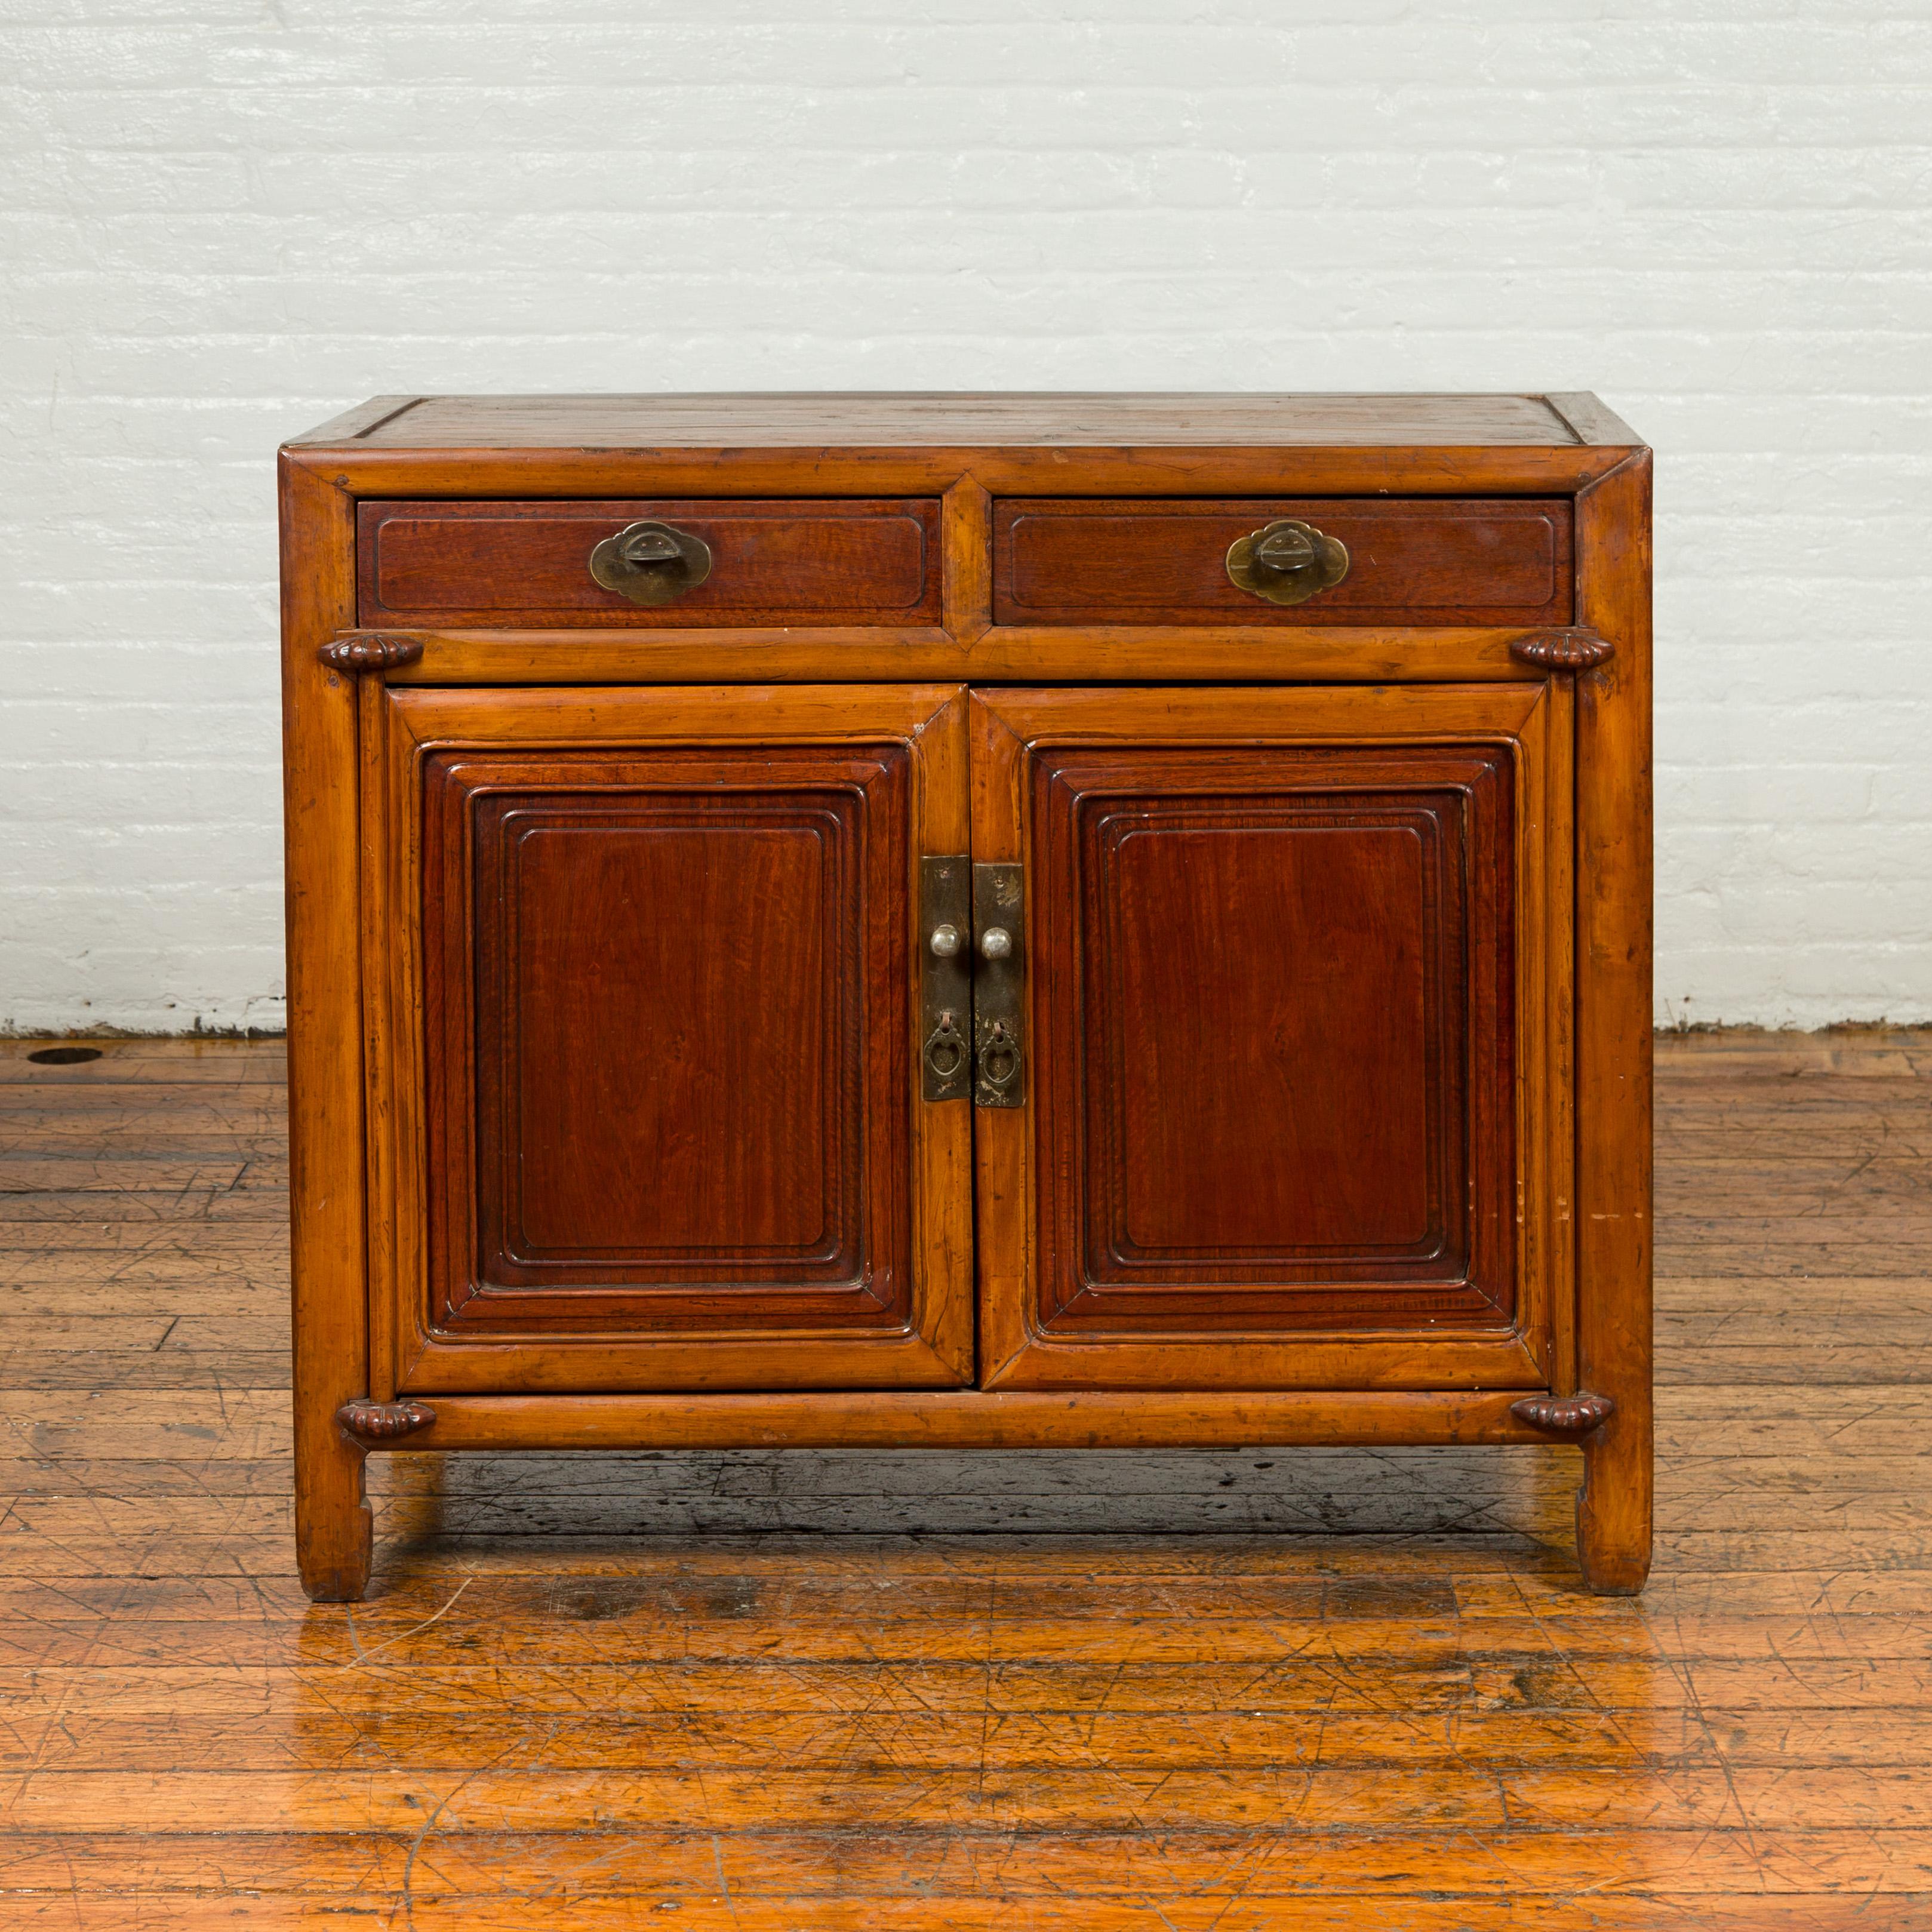 A Chinese vintage two-toned cabinet from the mid-20th century, with two drawers over two doors. Created in China during the midcentury period, this vintage cabinet features a rectangular top with central board, sitting above two drawers fitted with